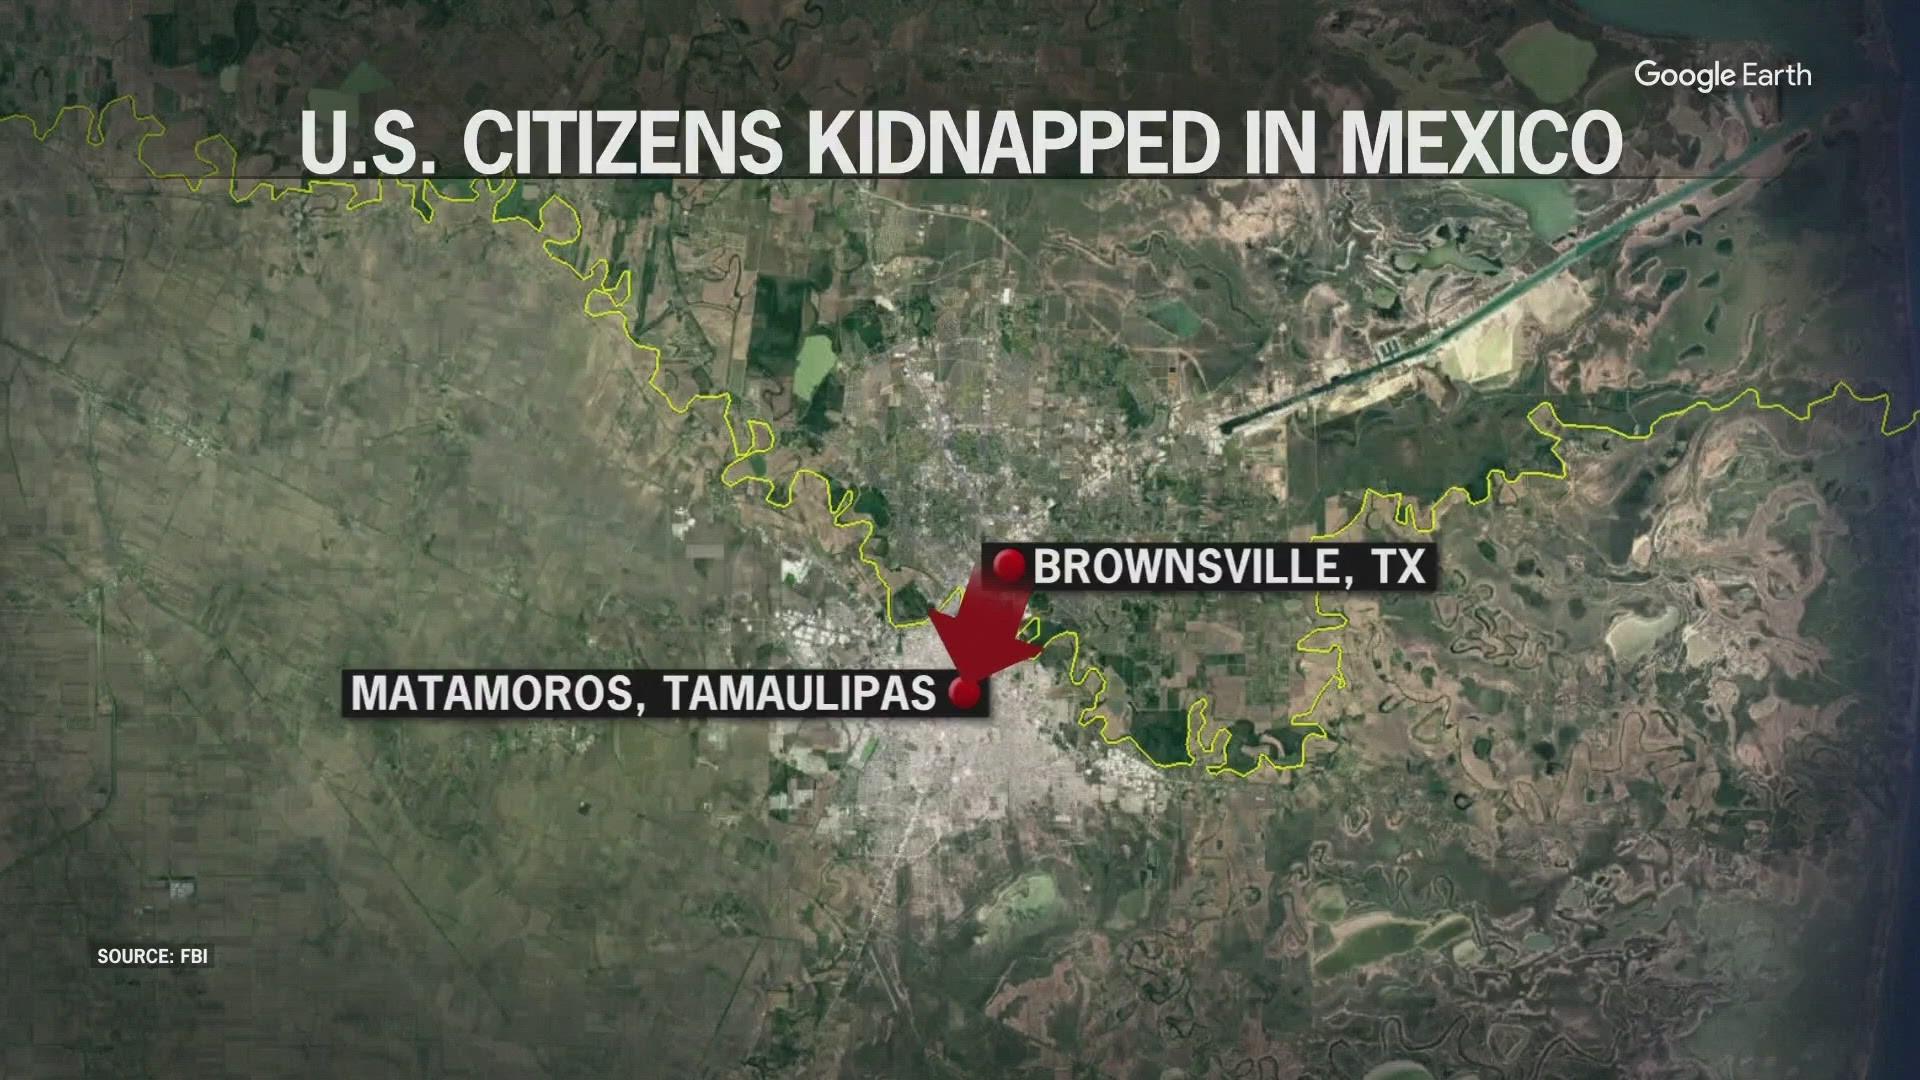 Four Americans were abducted last week when their van was caught in a shootout in Mexico.